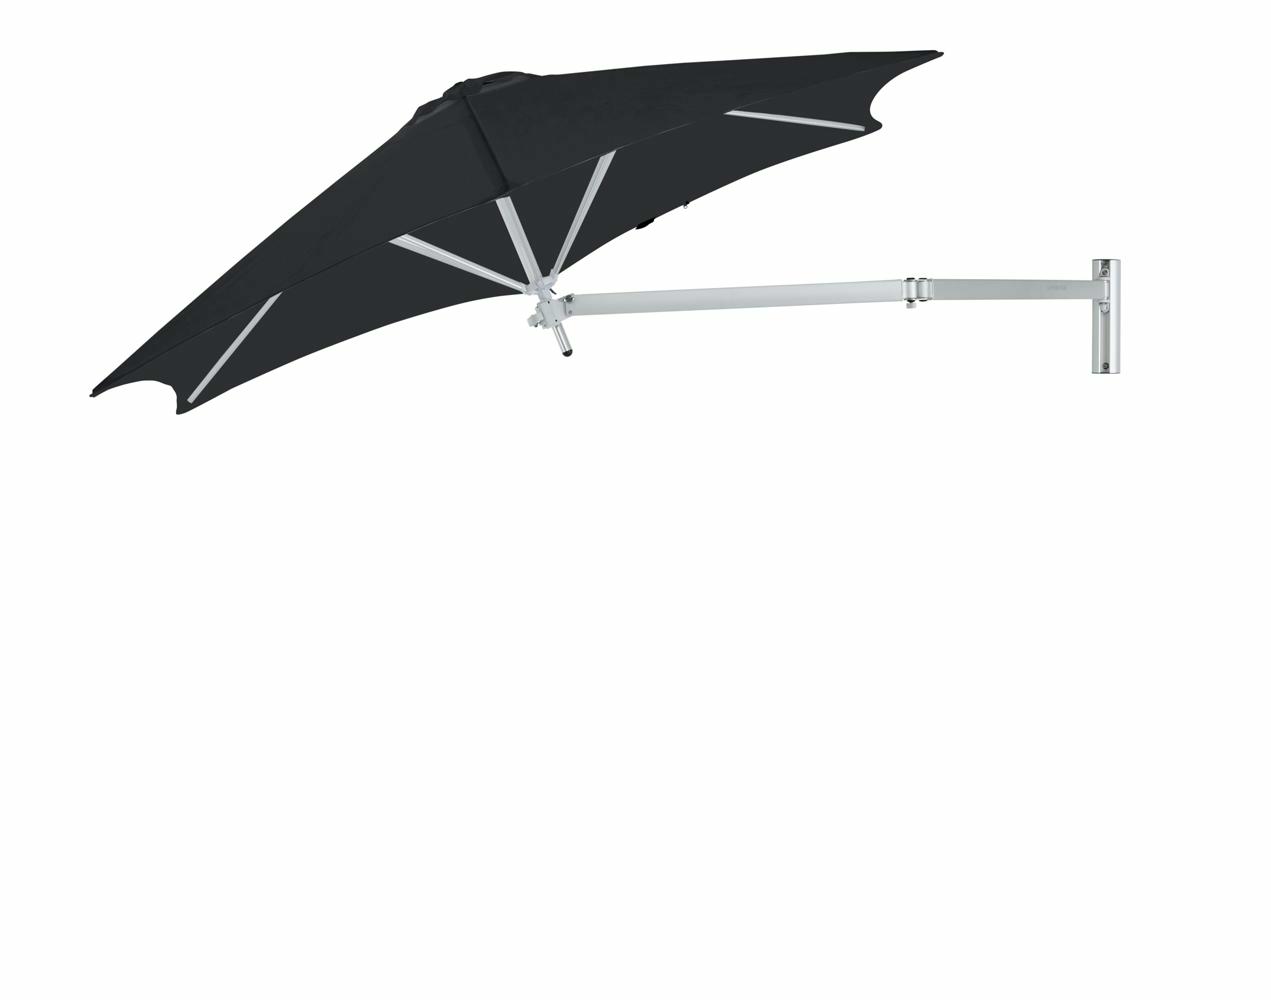 Paraflex wall mounted parasols round 2,7 m with Black fabric and a Neo arm